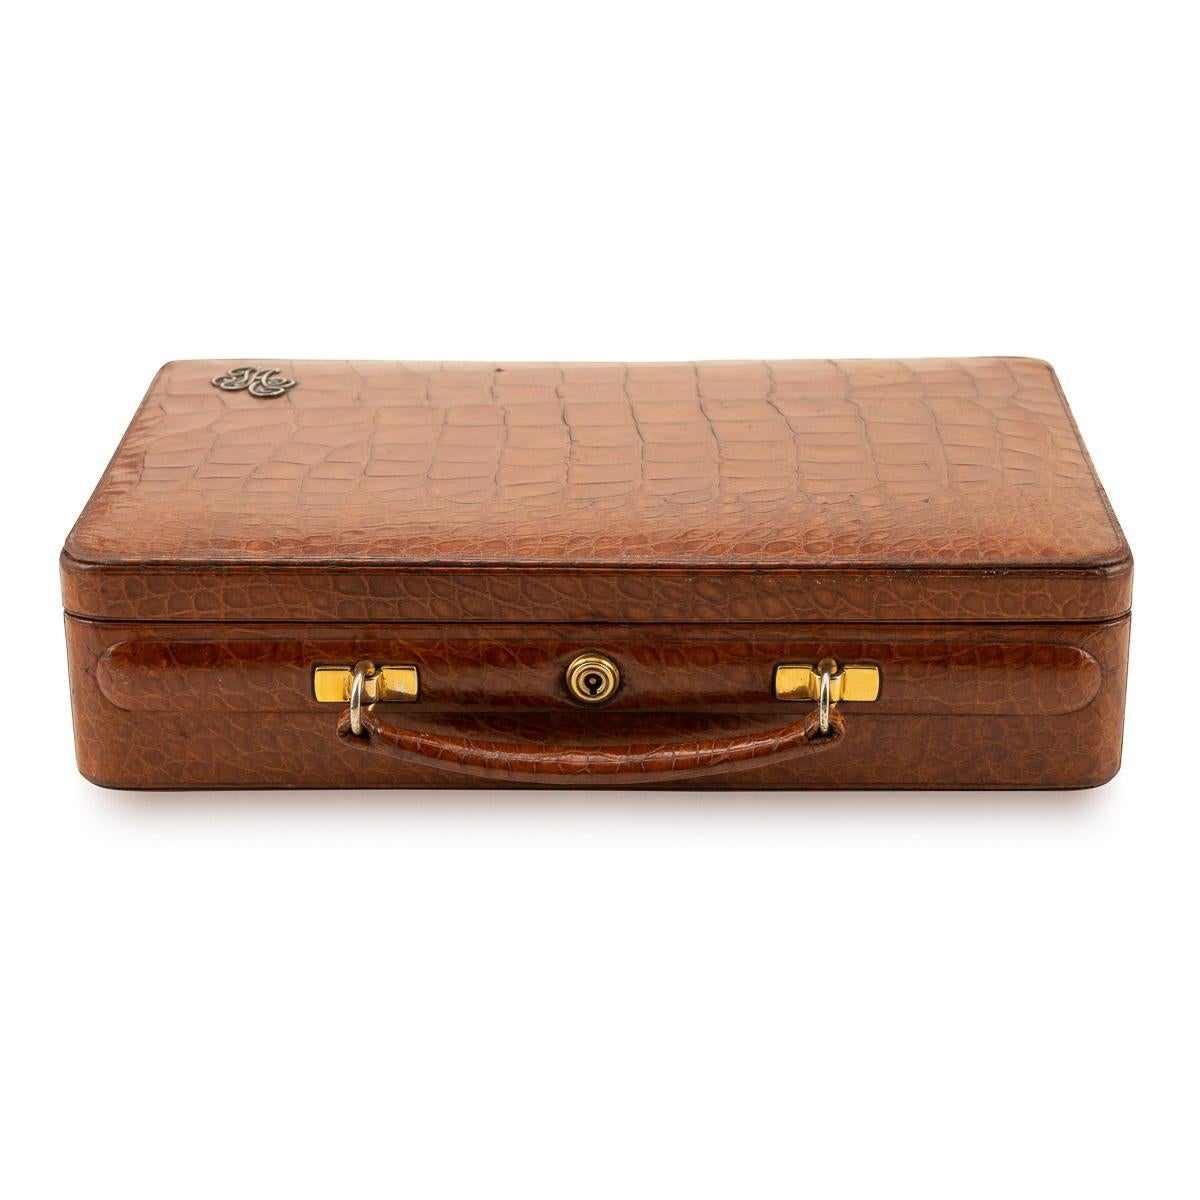 Antique early-20th century English crocodile jewellery case, with two concertina trays lined in light velvet with the initials JA in silver on the outside of the case, set with a Bramah lock and key. Retailed by renowned L.C Vickery or Regent st,